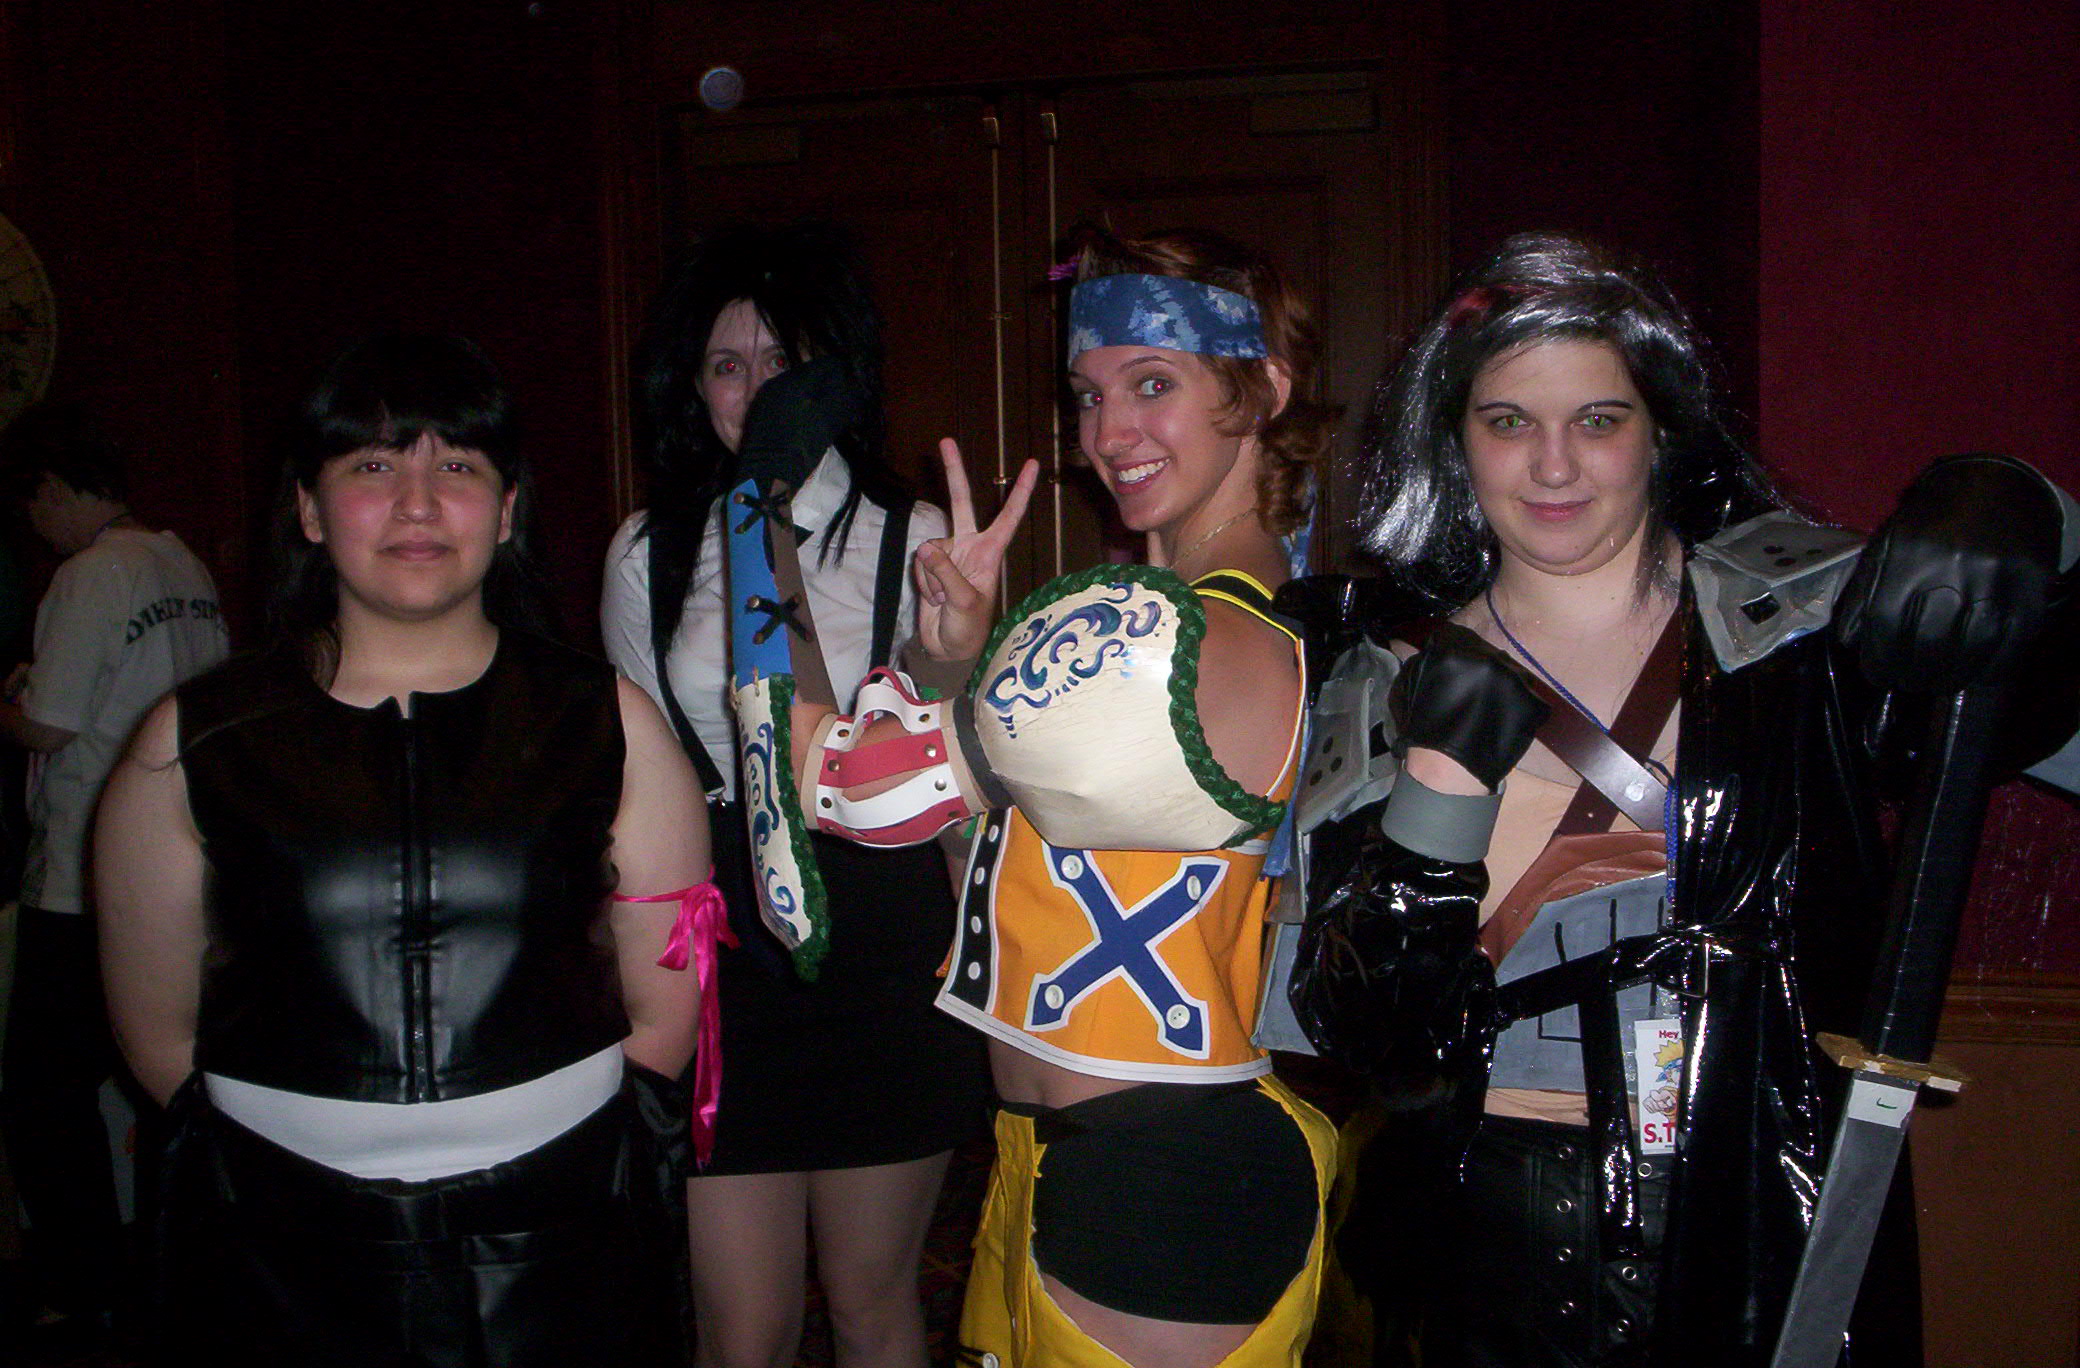 Me with a Final Fantasy group.